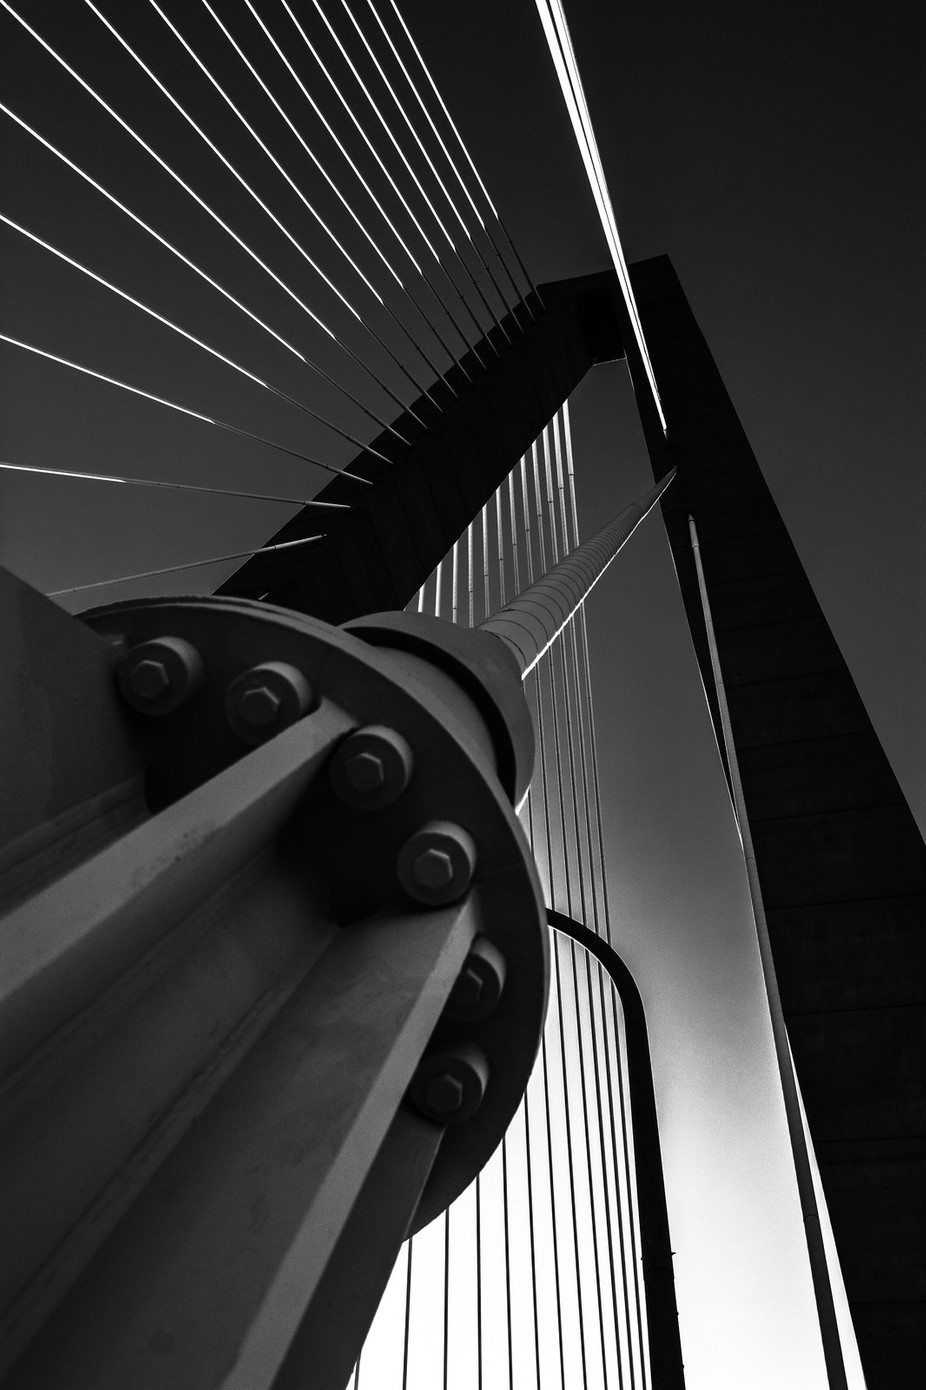 Arthur Ravenel Bridge Series in Black and White by Photogirl118 - Parallel Compositions Photo Contest